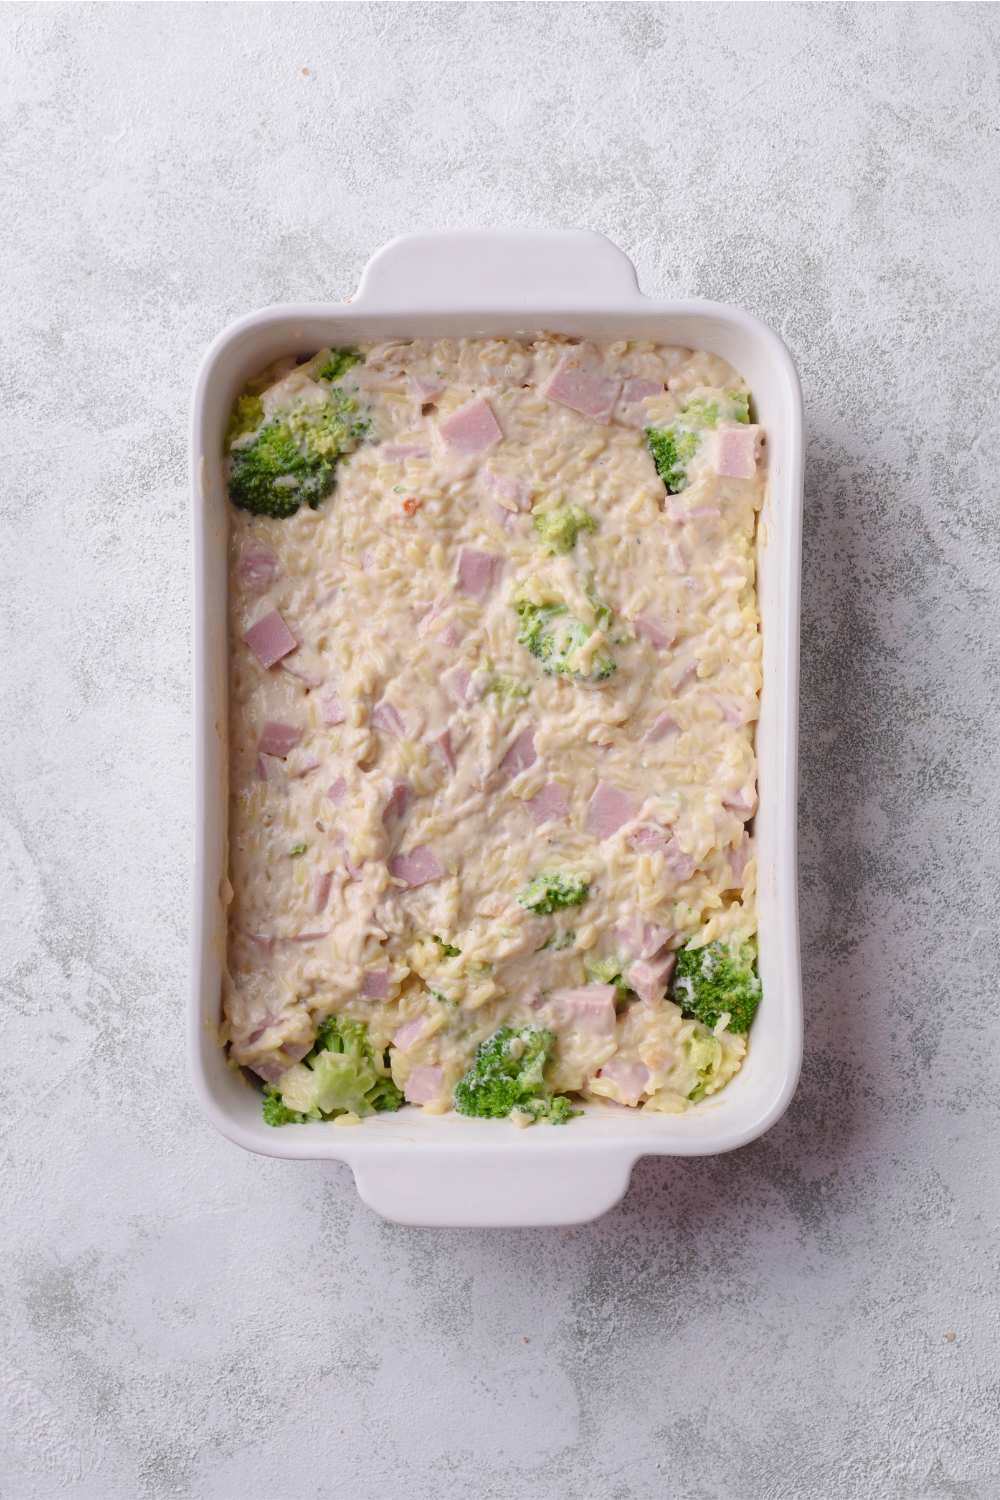 A baking dish filled with unbaked ham, broccoli, and rice casserole.